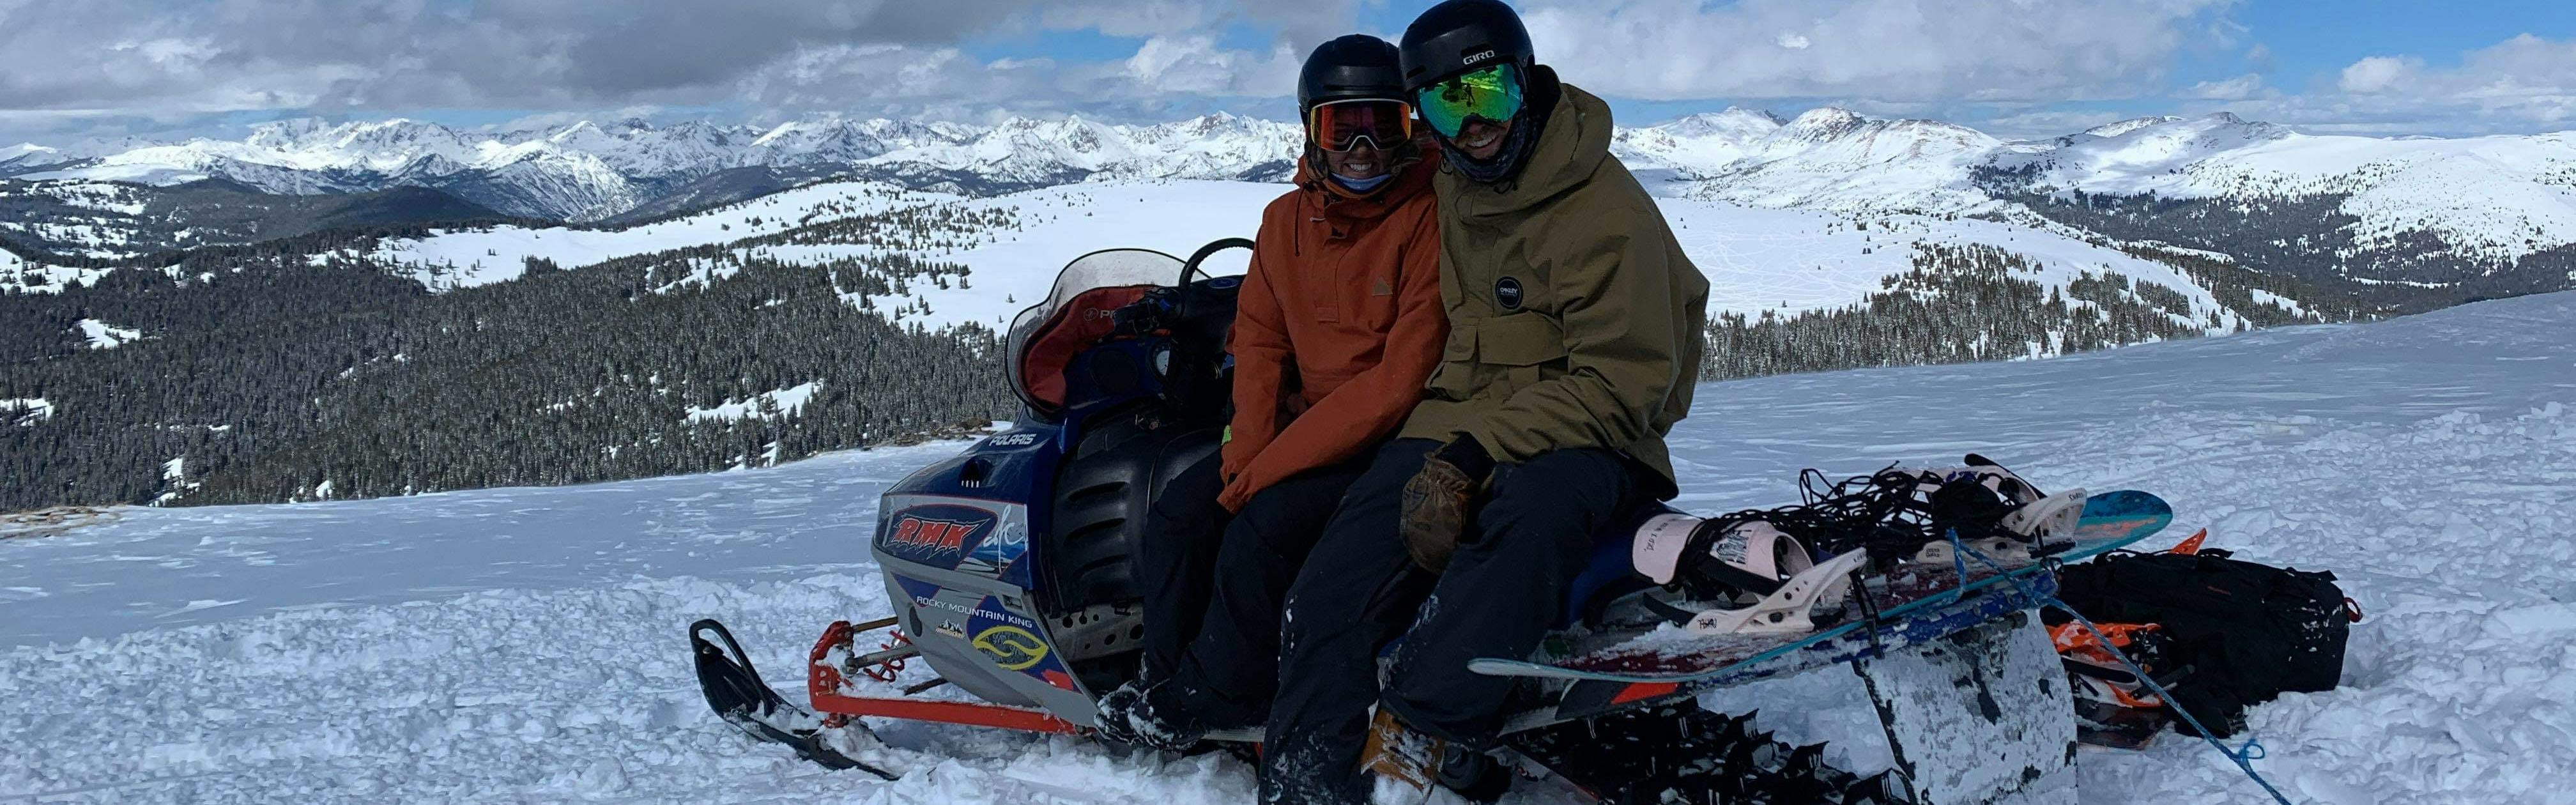 Two people sitting on a snowmobile with ski gear on. There are mountains in the background and one of the people is wearing the Giro Ledge MIPS Helmet.